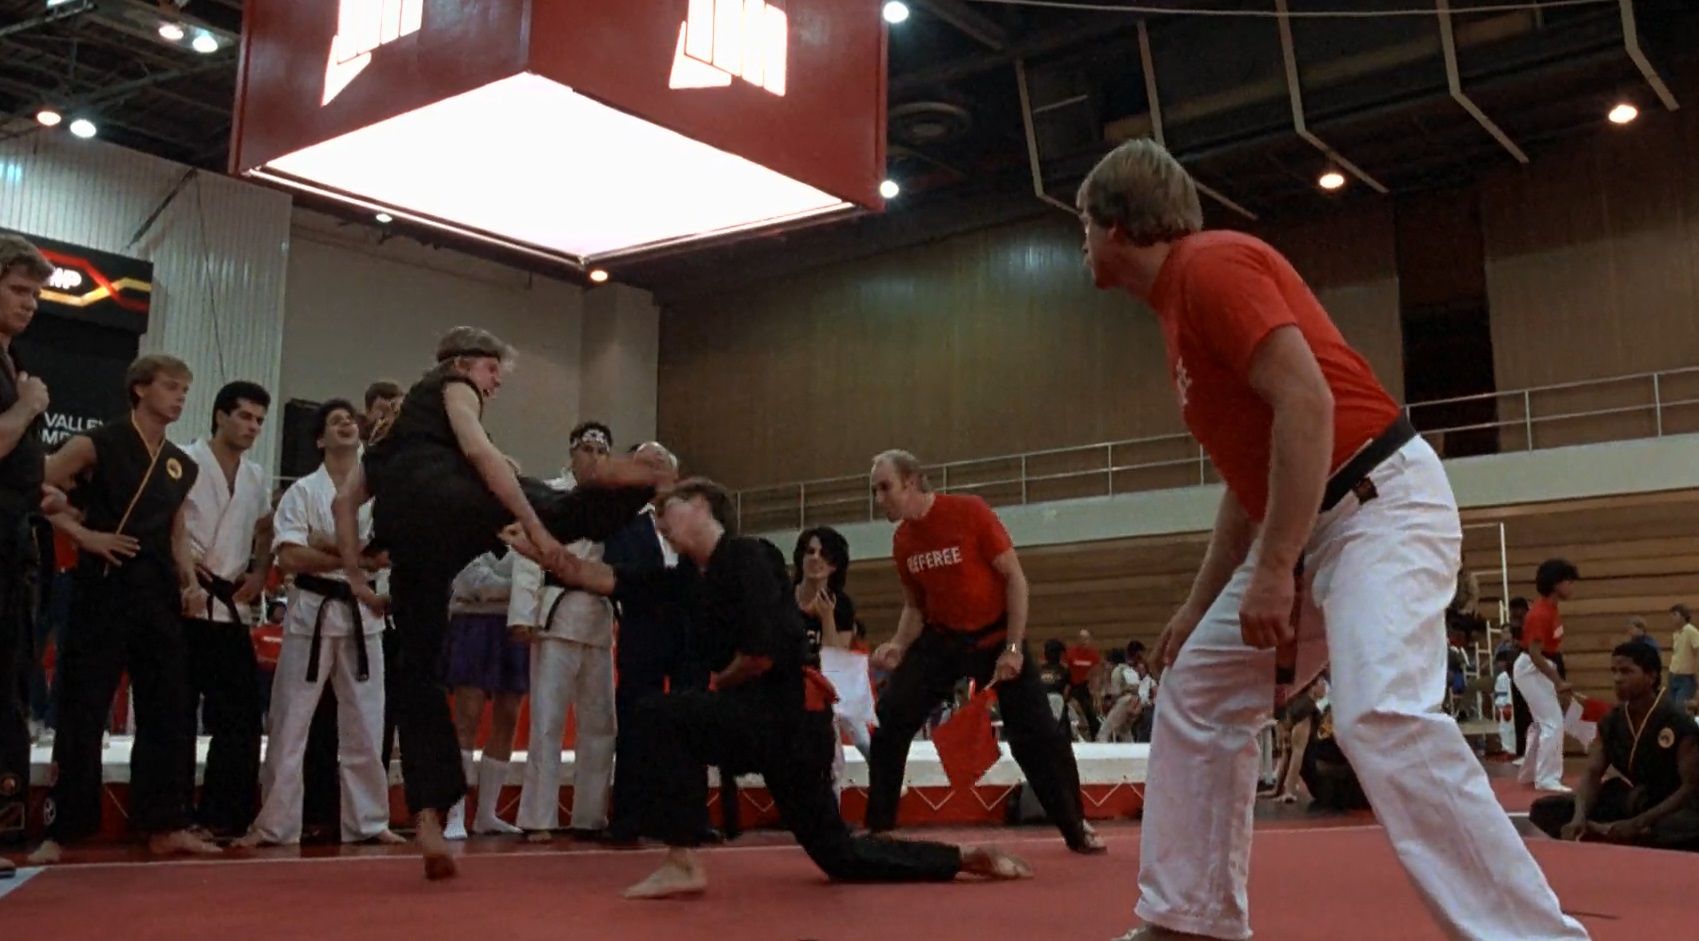 Of Course the Karate Kid Crane Kick Was a Legal Move